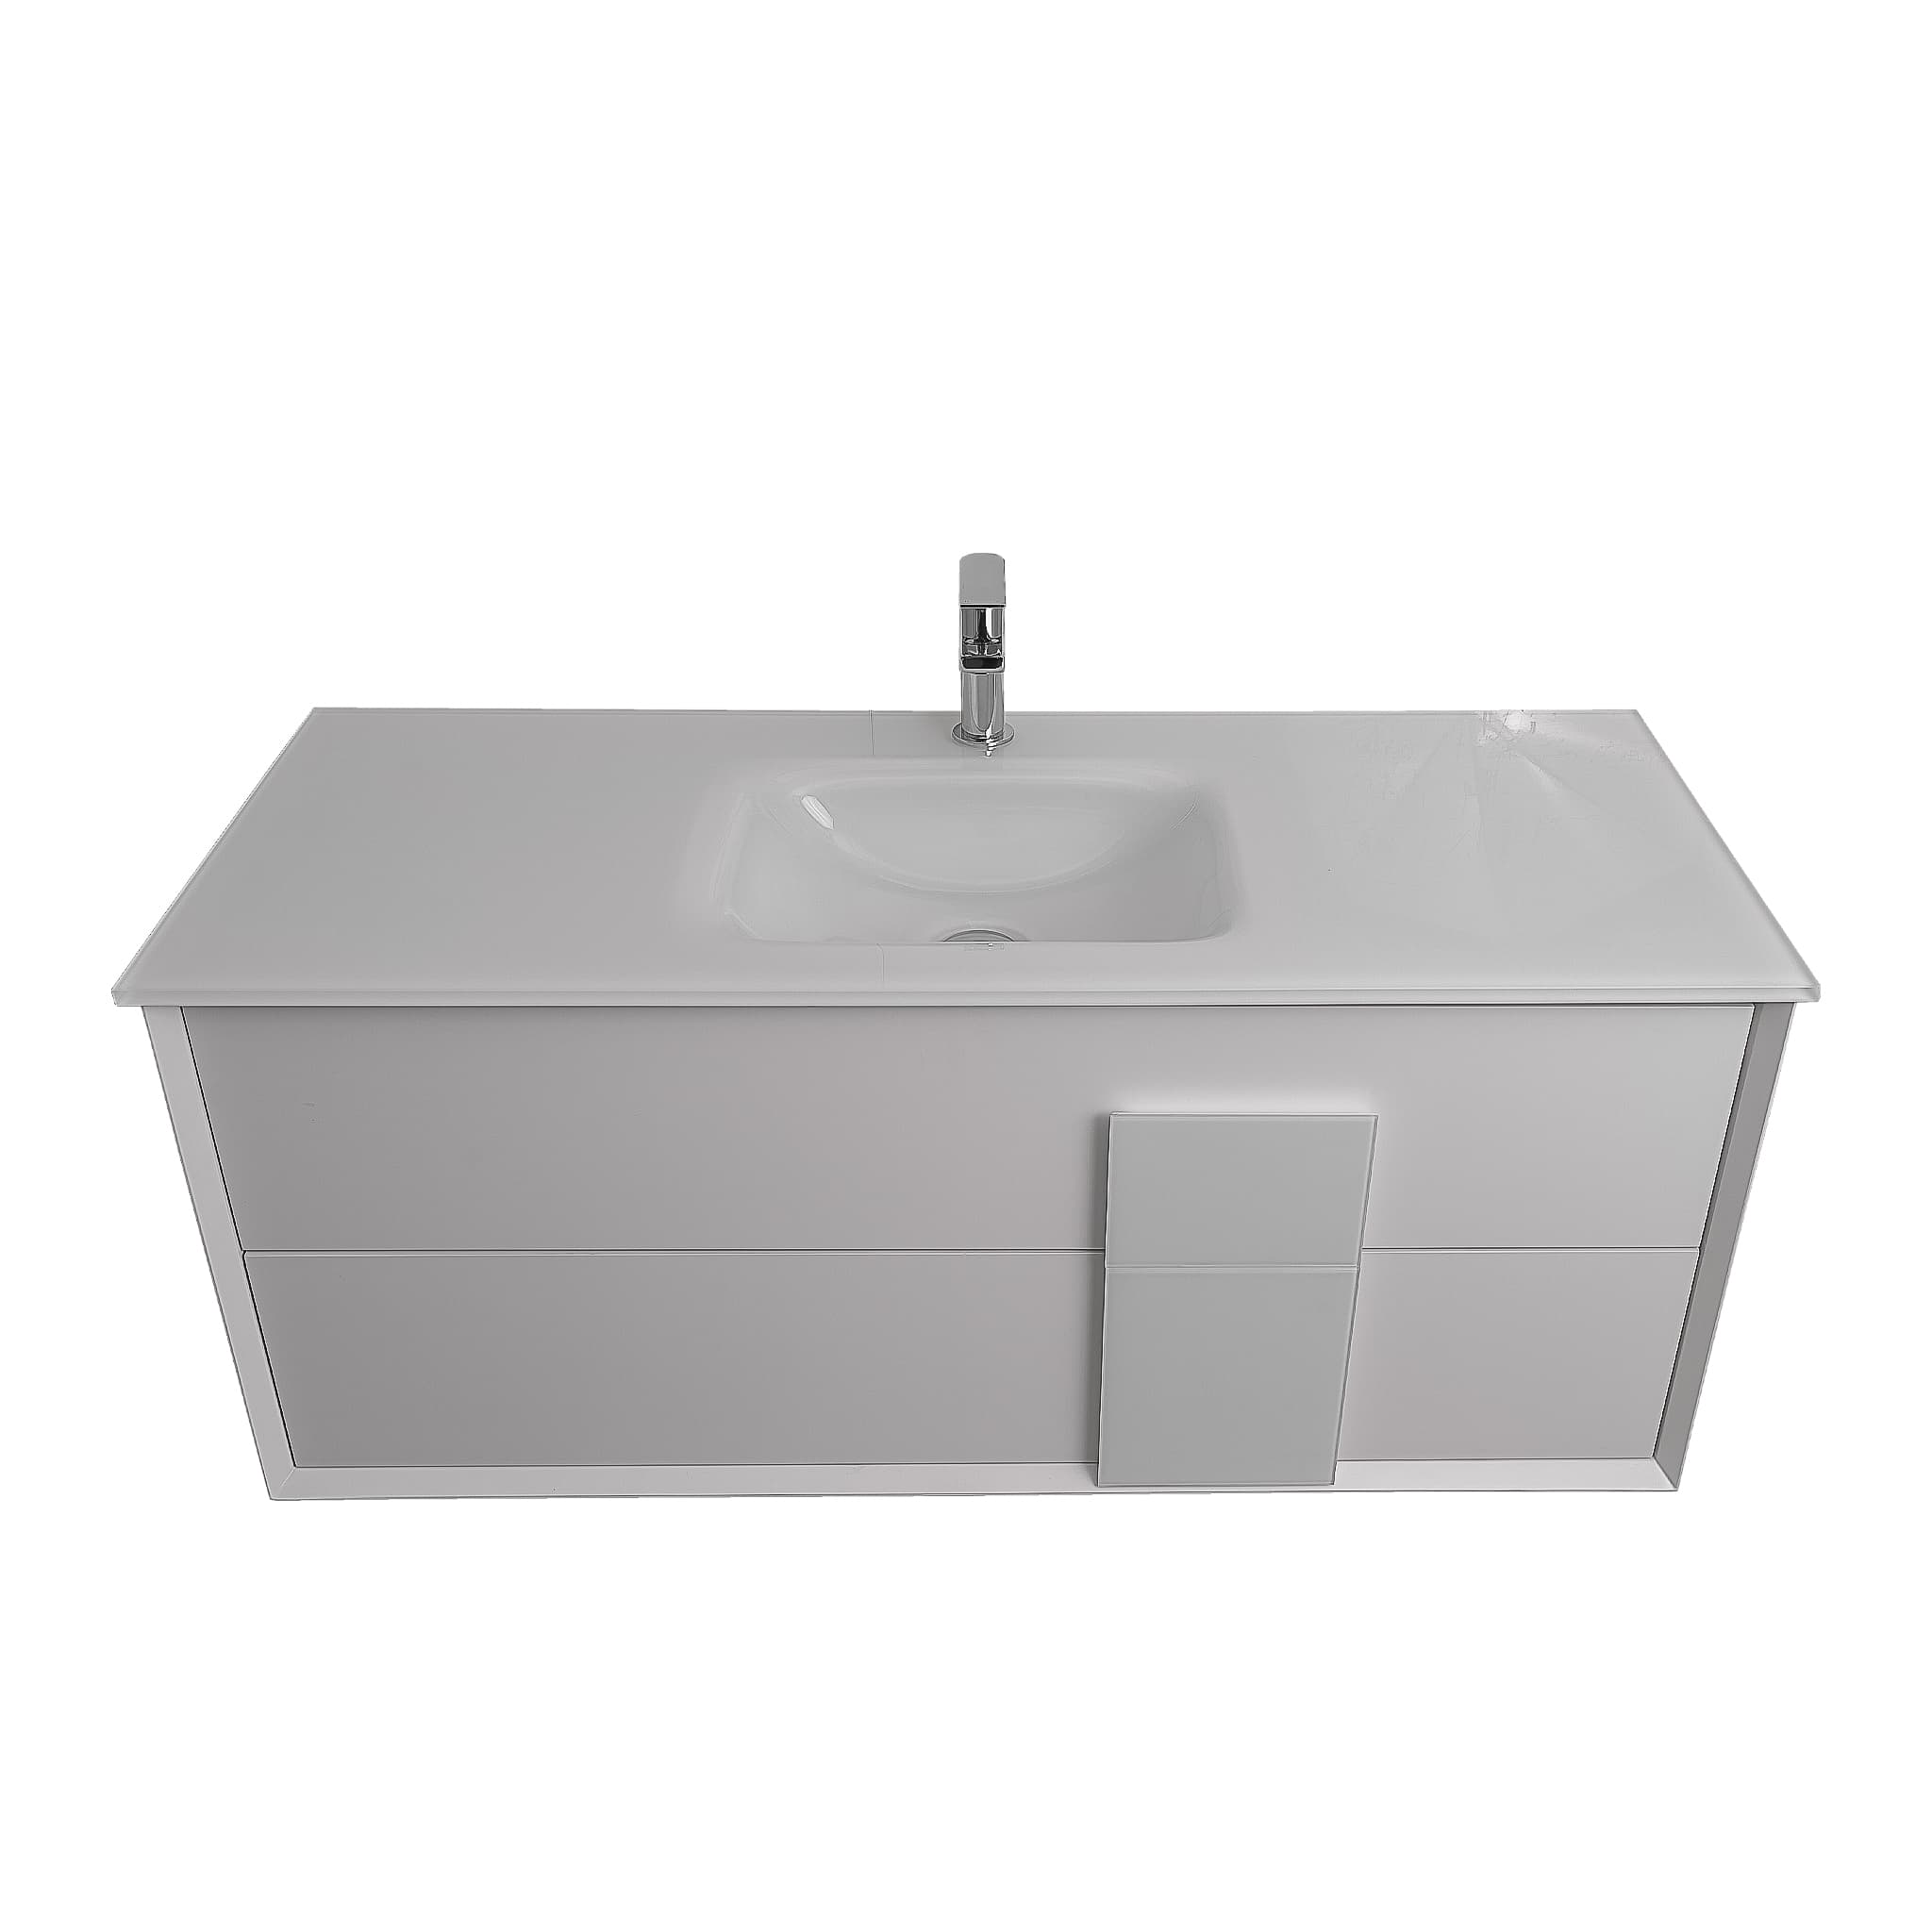 Piazza 47.5 Matte White With White Handle Cabinet, White Tempered Glass Sink, Wall Mounted Modern Vanity Set